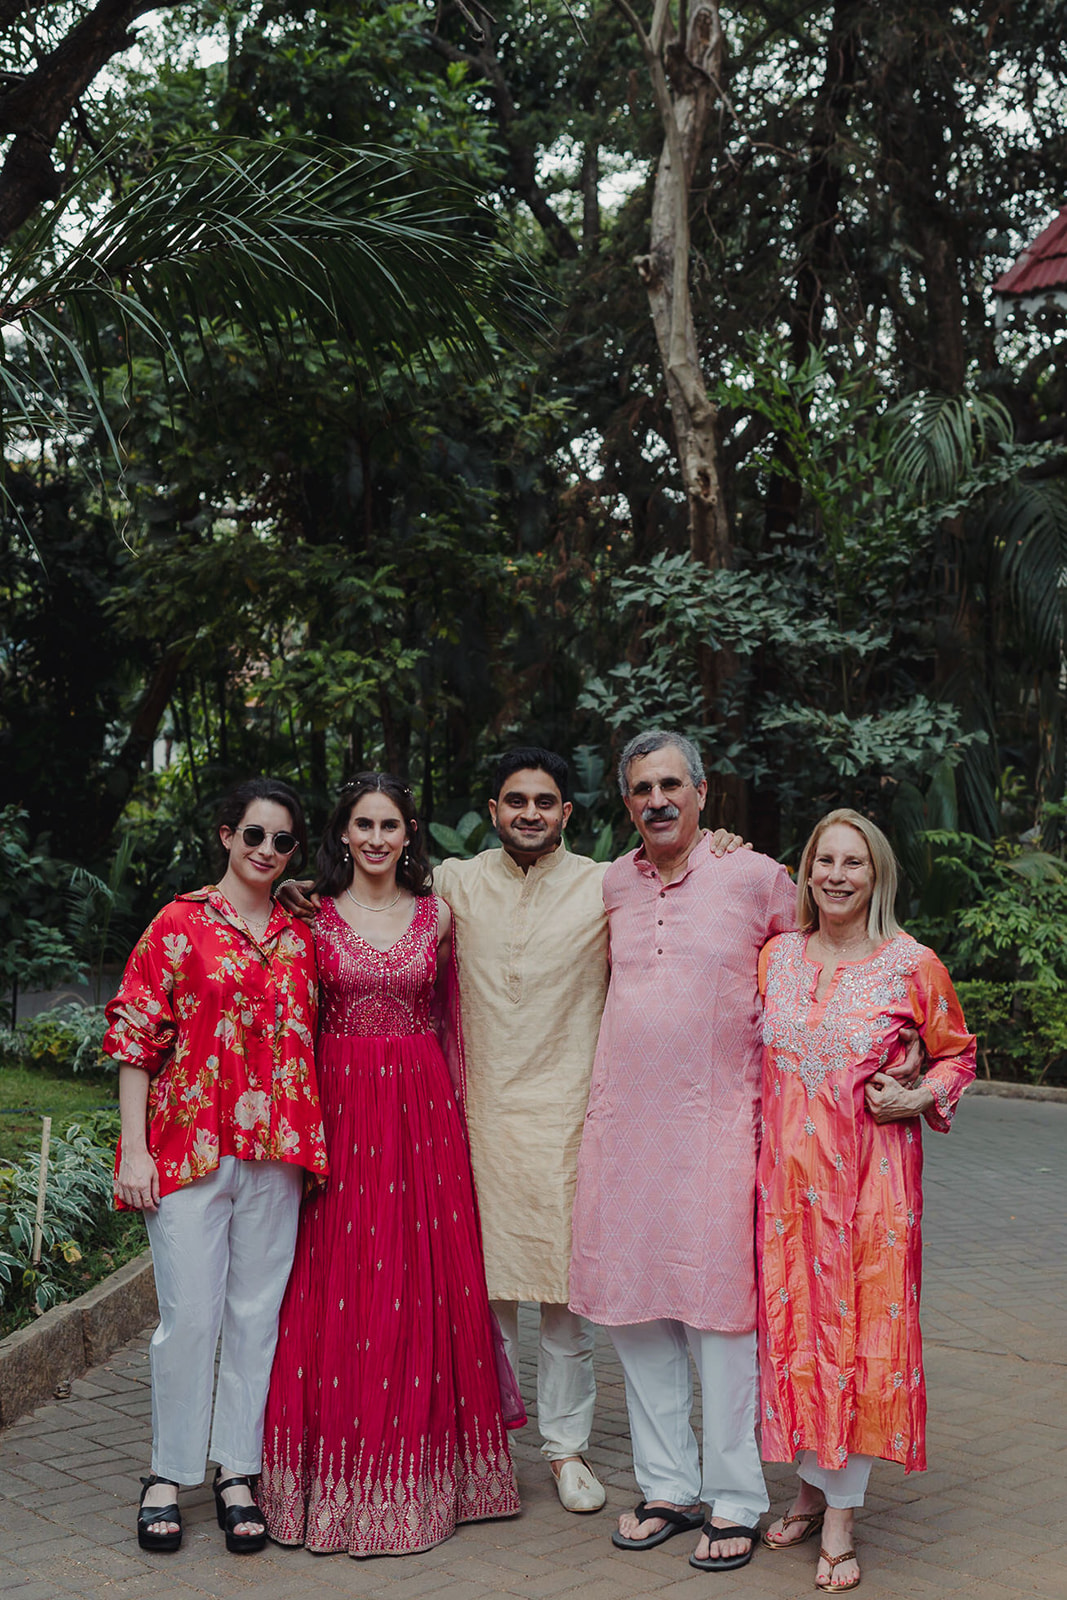 Surrounding the bride are her beaming family members, arranged in a semi-circle that exudes warmth and togetherness. 